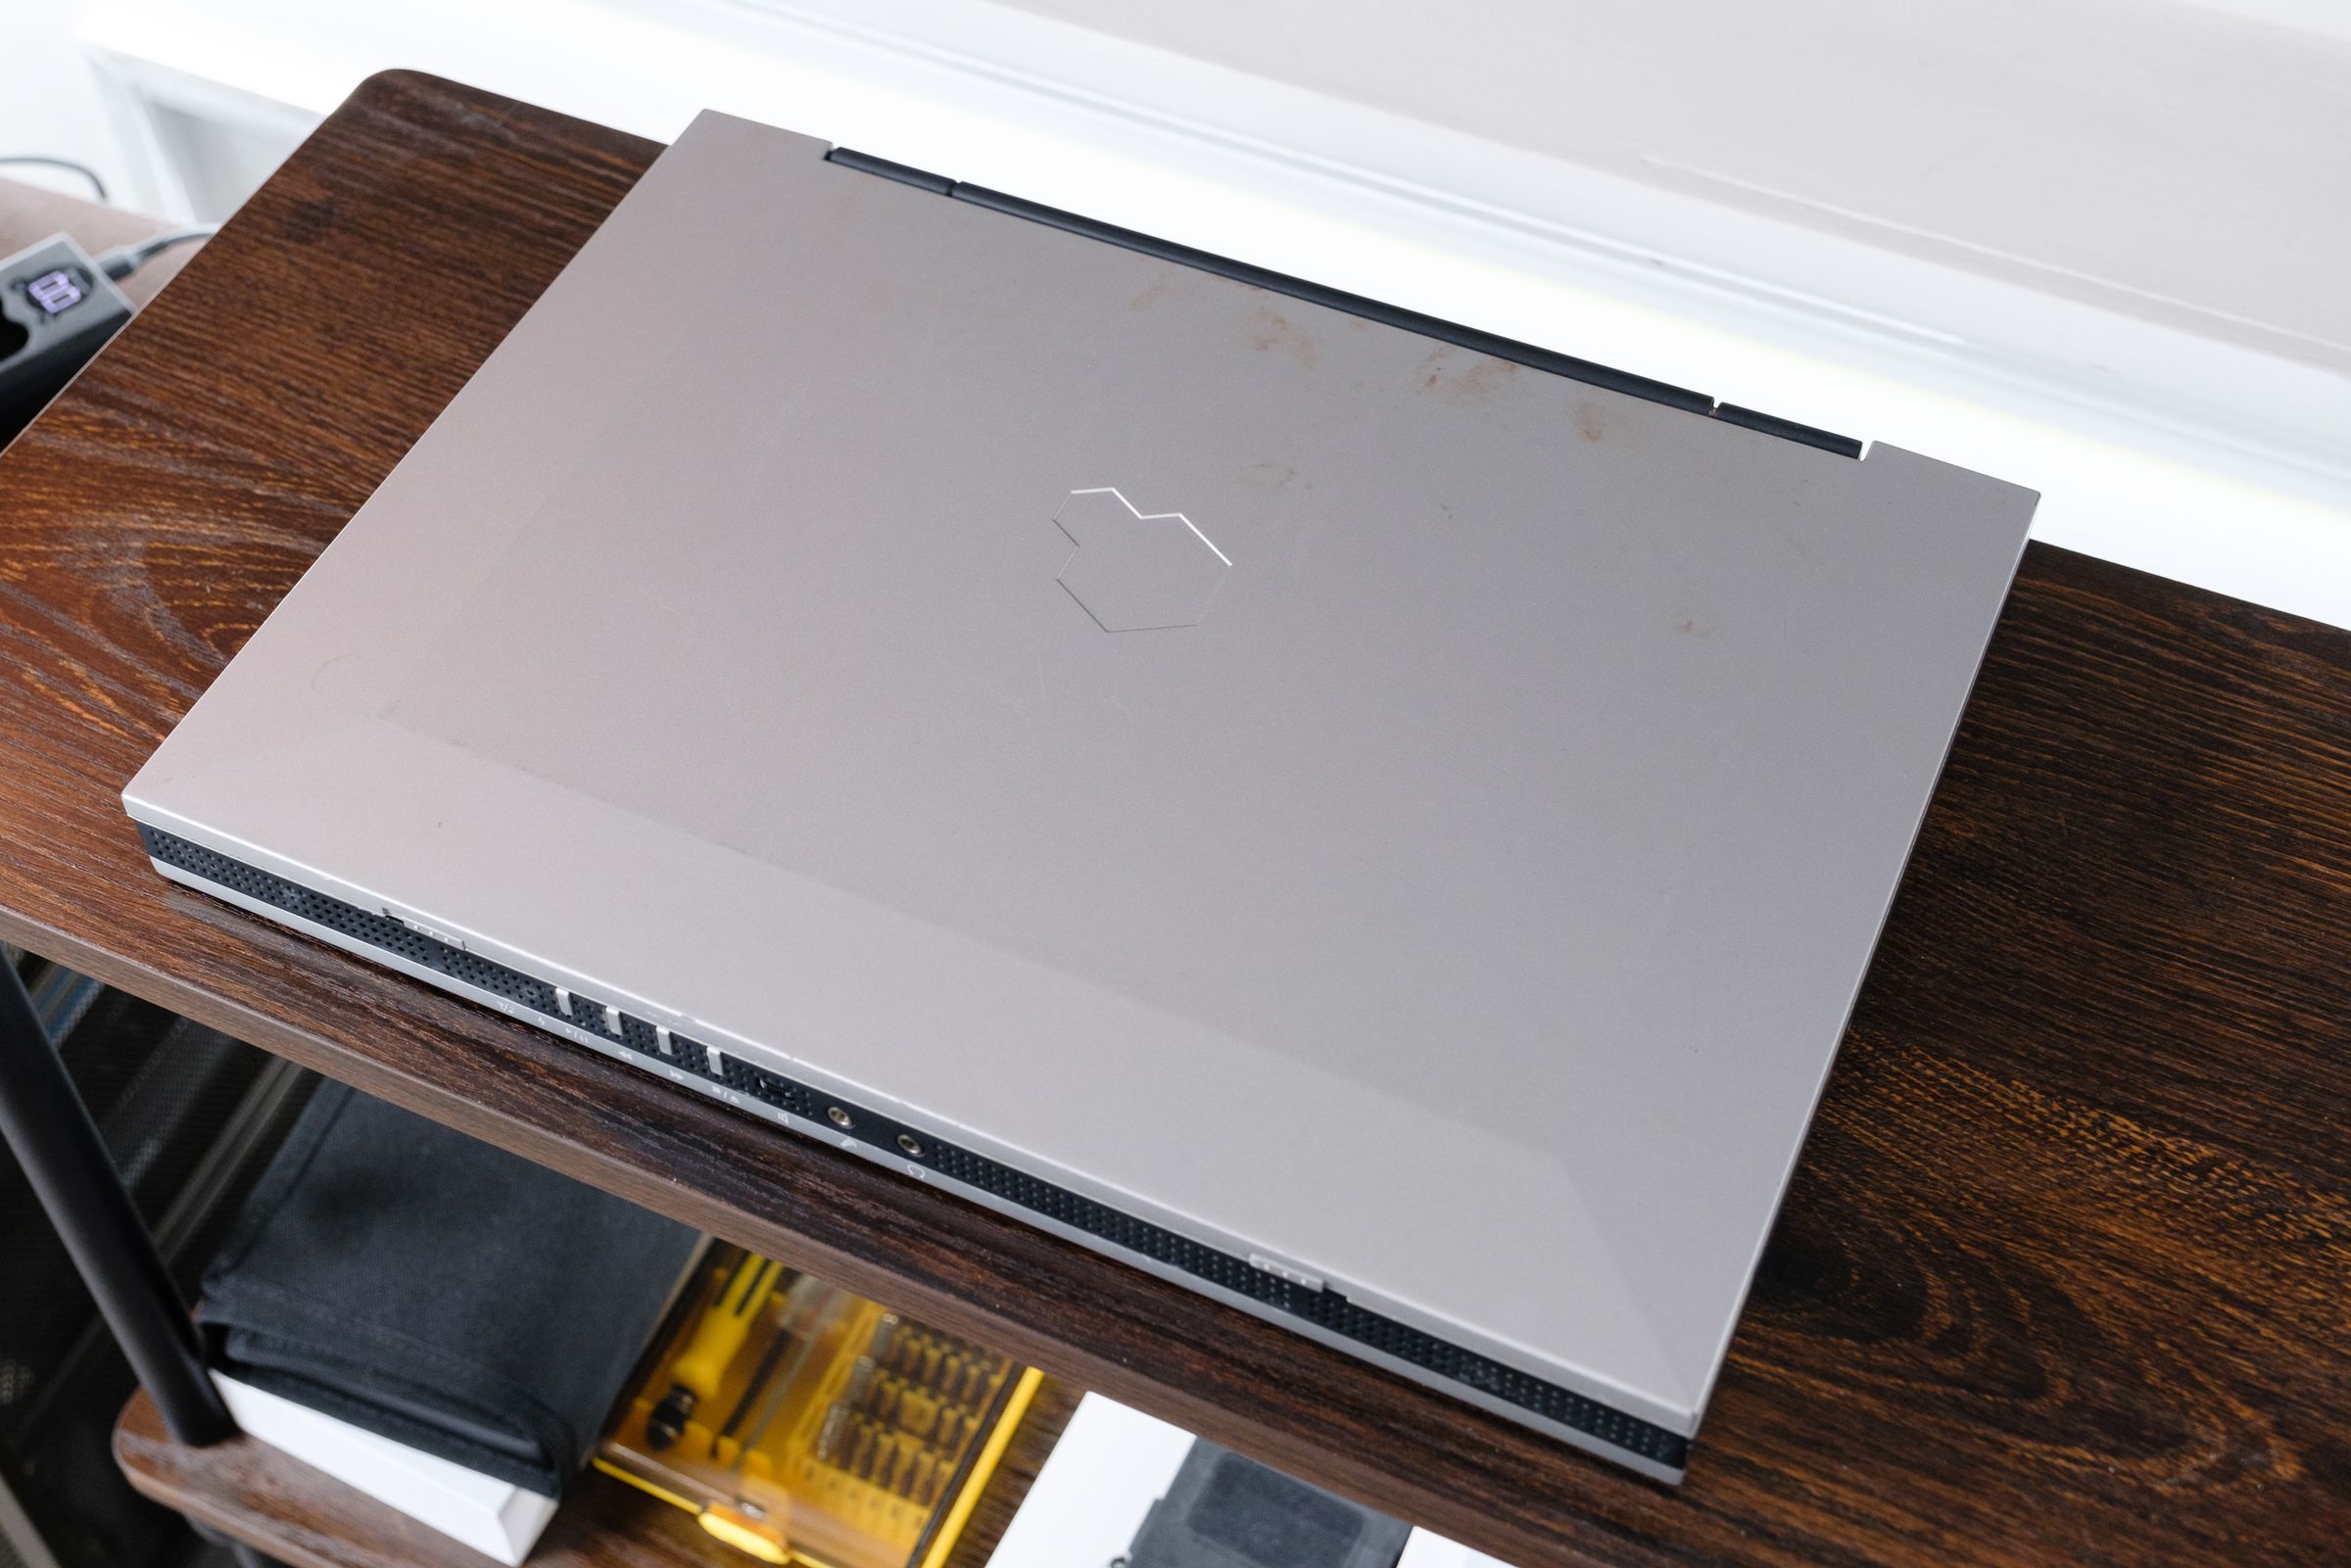 A silver laptop closed on a wooden table.